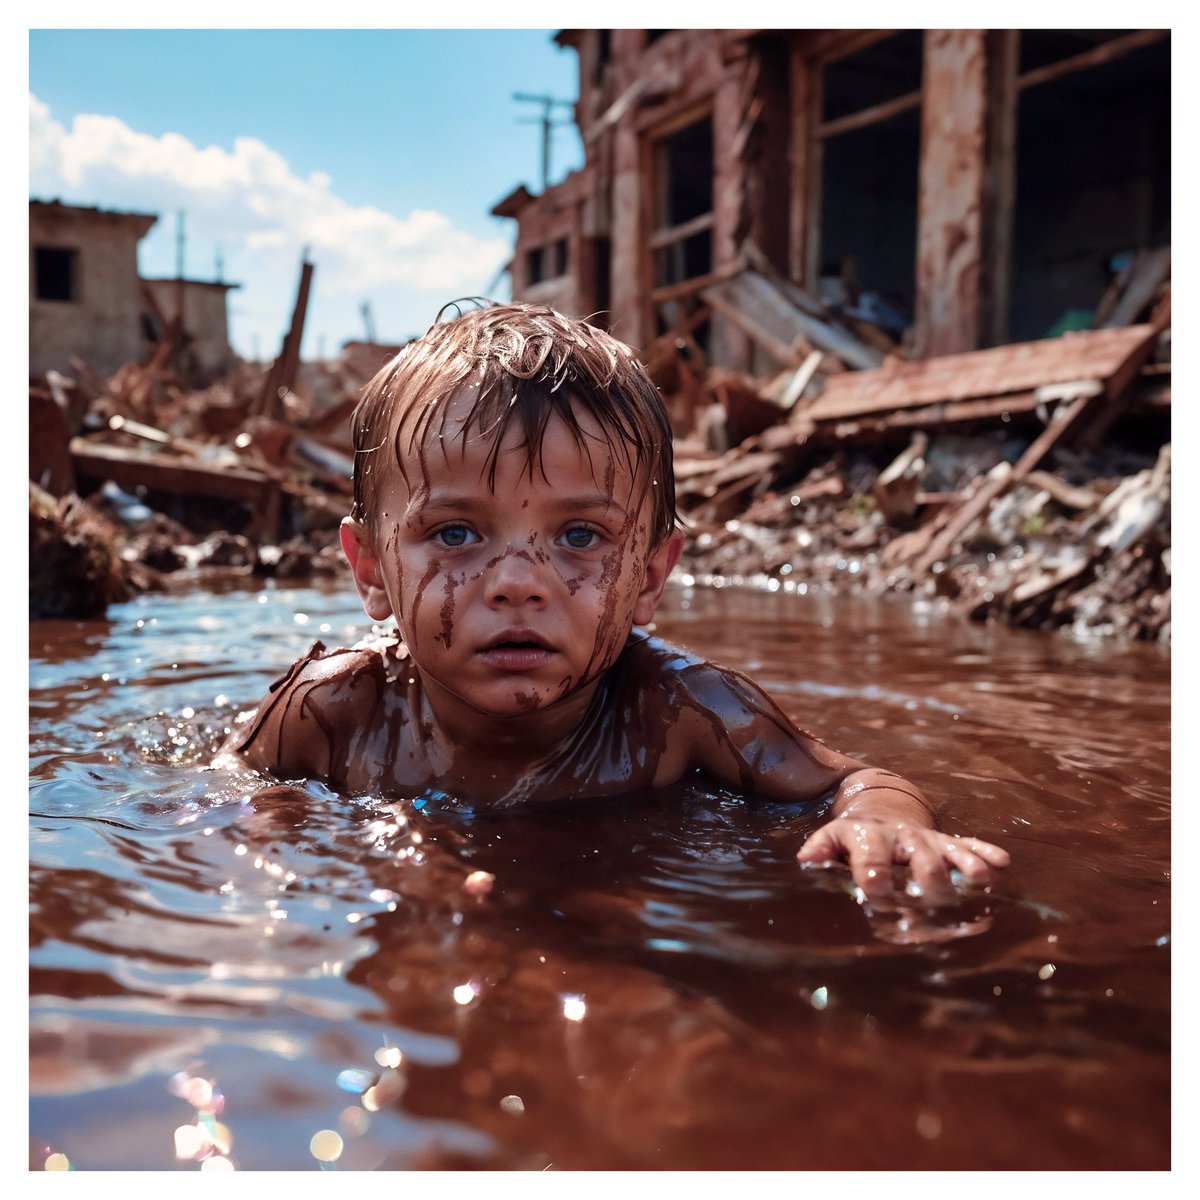 |[15]| 🫠 Playtime in Puddles 🫠
____________________________
✍️ Prompt details:
🤖 A striking vivid image of a child baby boy swimming in a brown water pool in a destroyed post-apocalyptic world
____________________________

#AIart #aiartist #digitalart #DigitalArtist